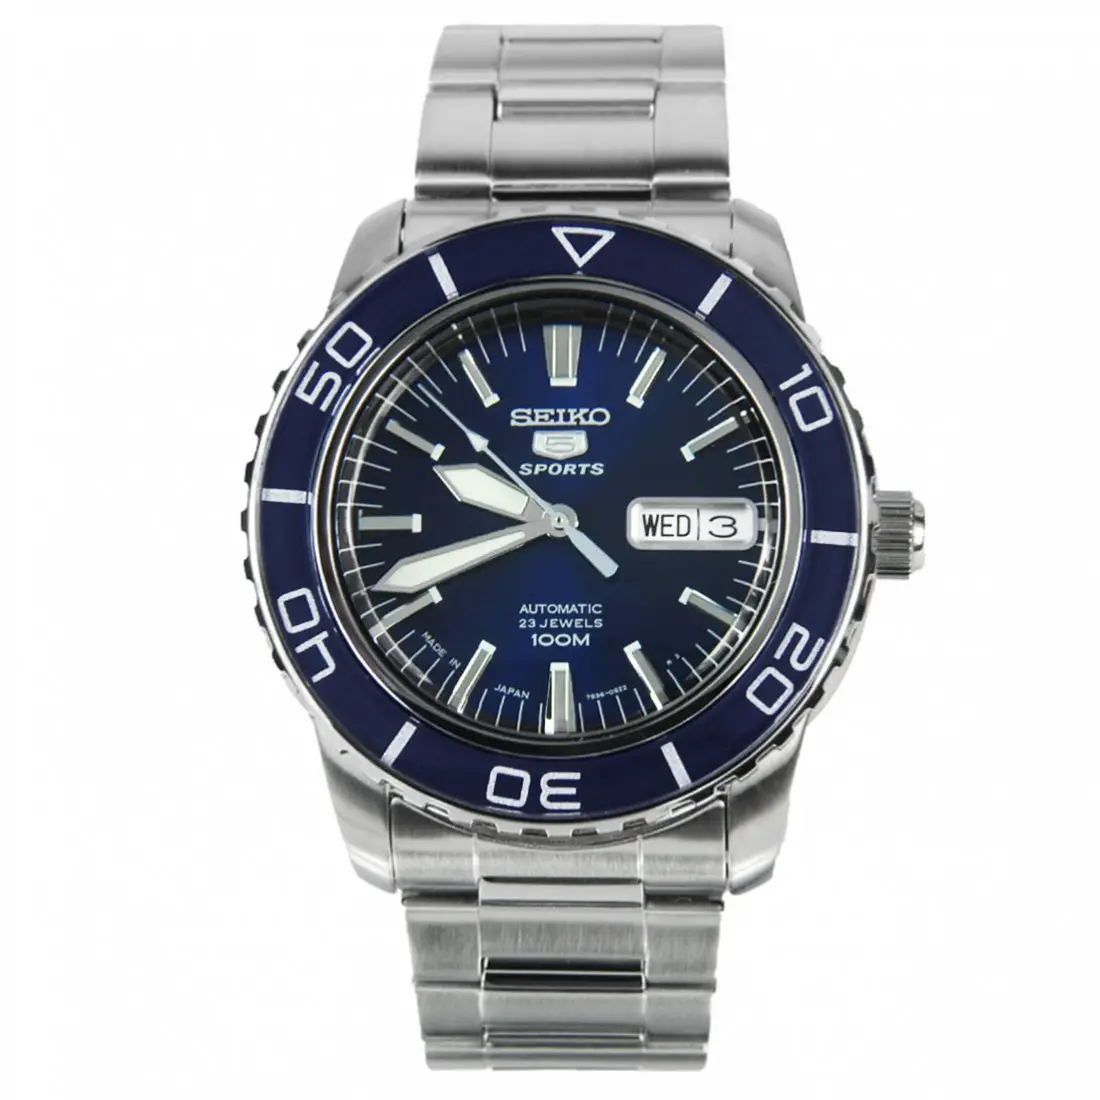 Seiko 5 Men's Automatic Watch SNZH53 Review - The Watch Blog